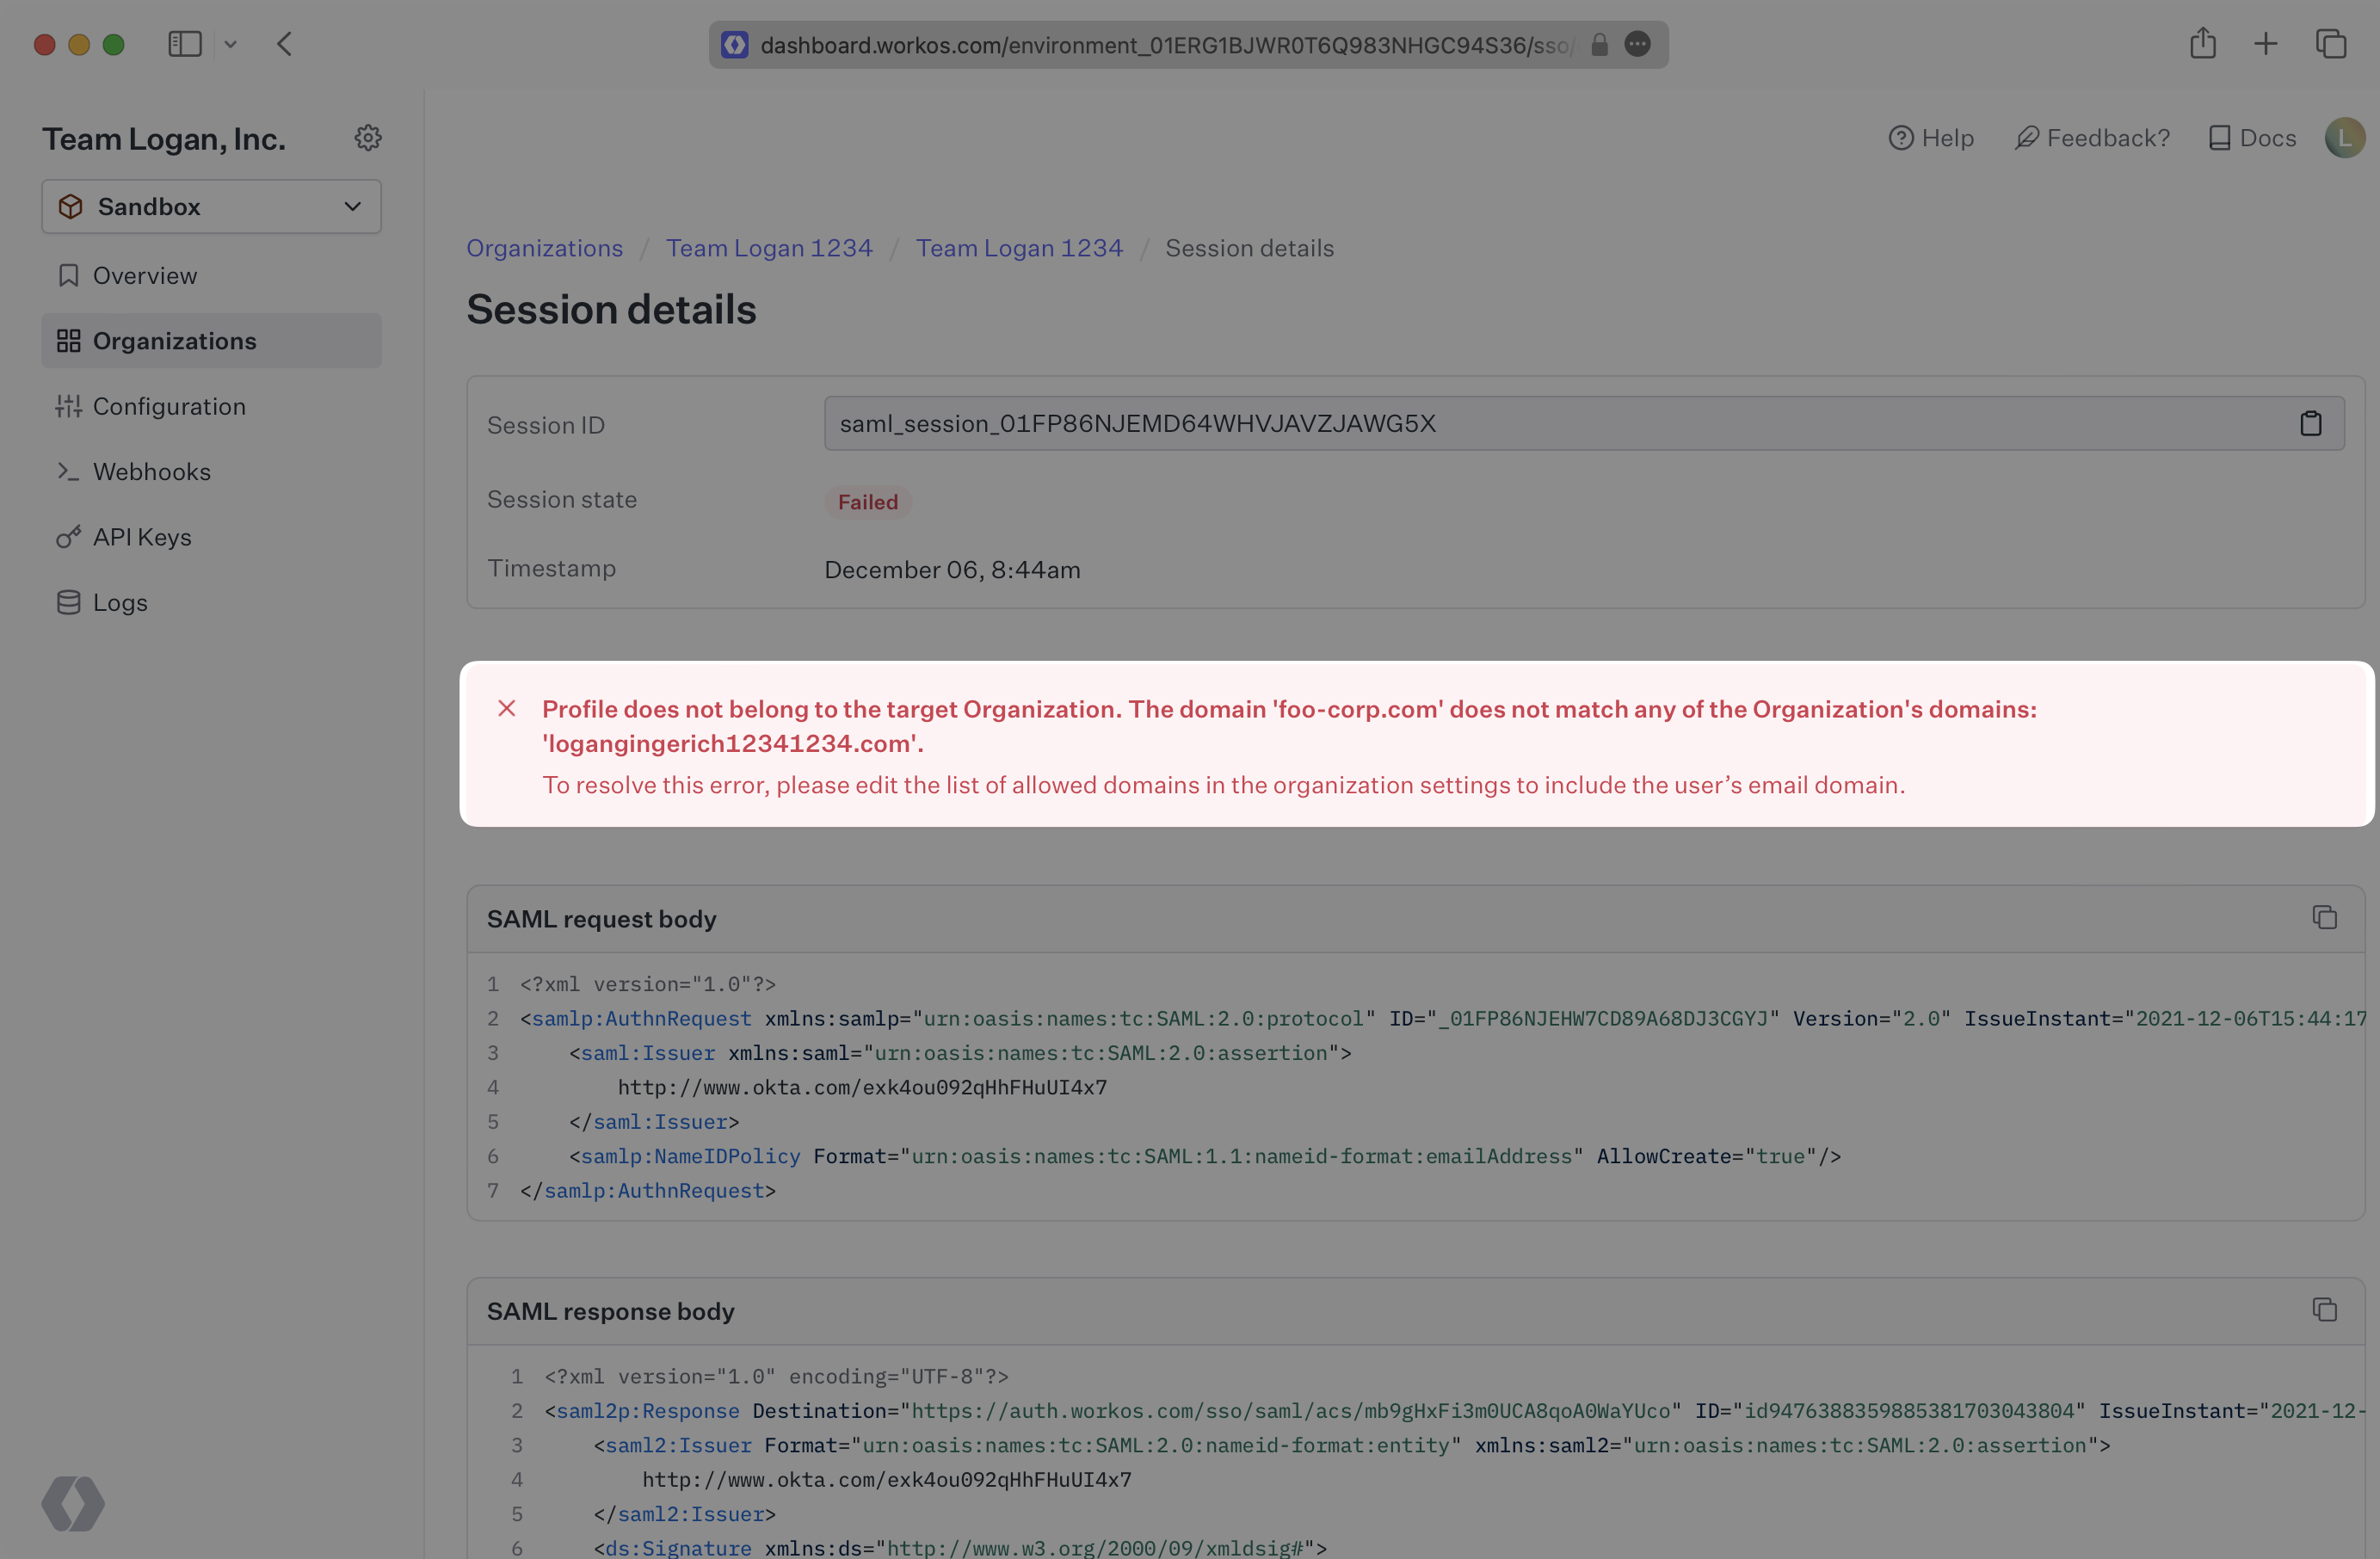 A screenshot showing an error in the SAML Session Details in the WorkOS Dashboard.